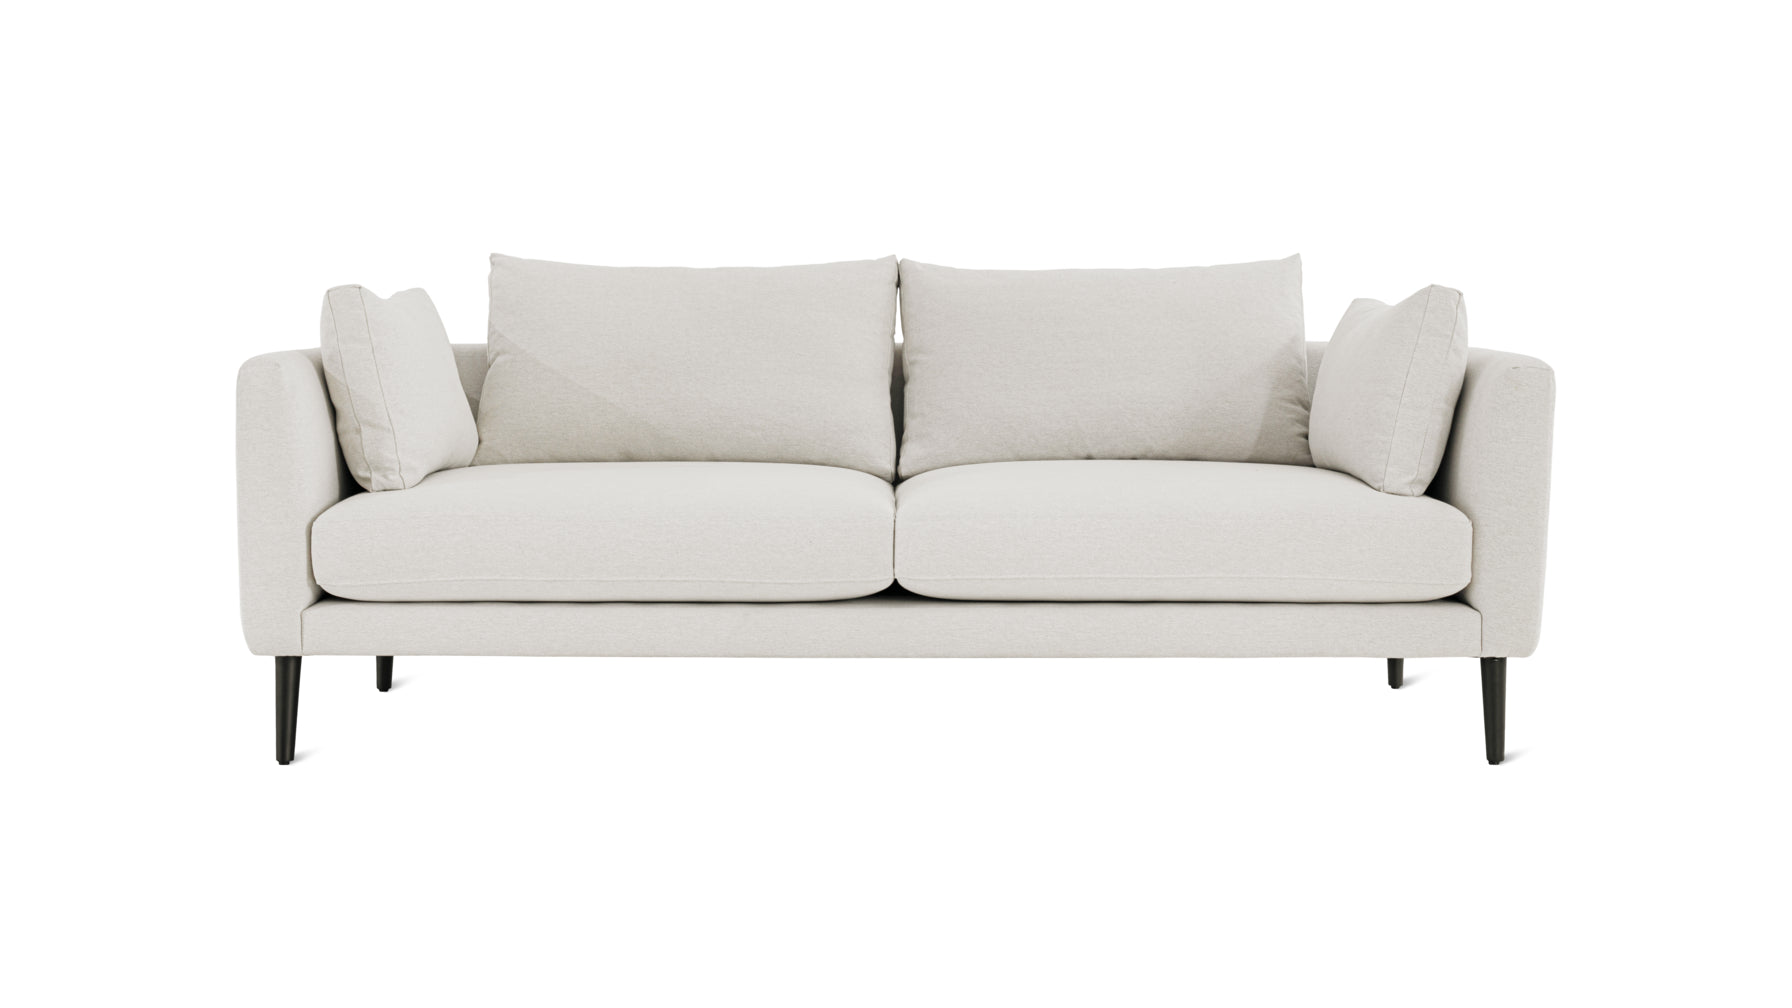 Stay A While Sofa, 2.5 Seater, Coconut - Image 1